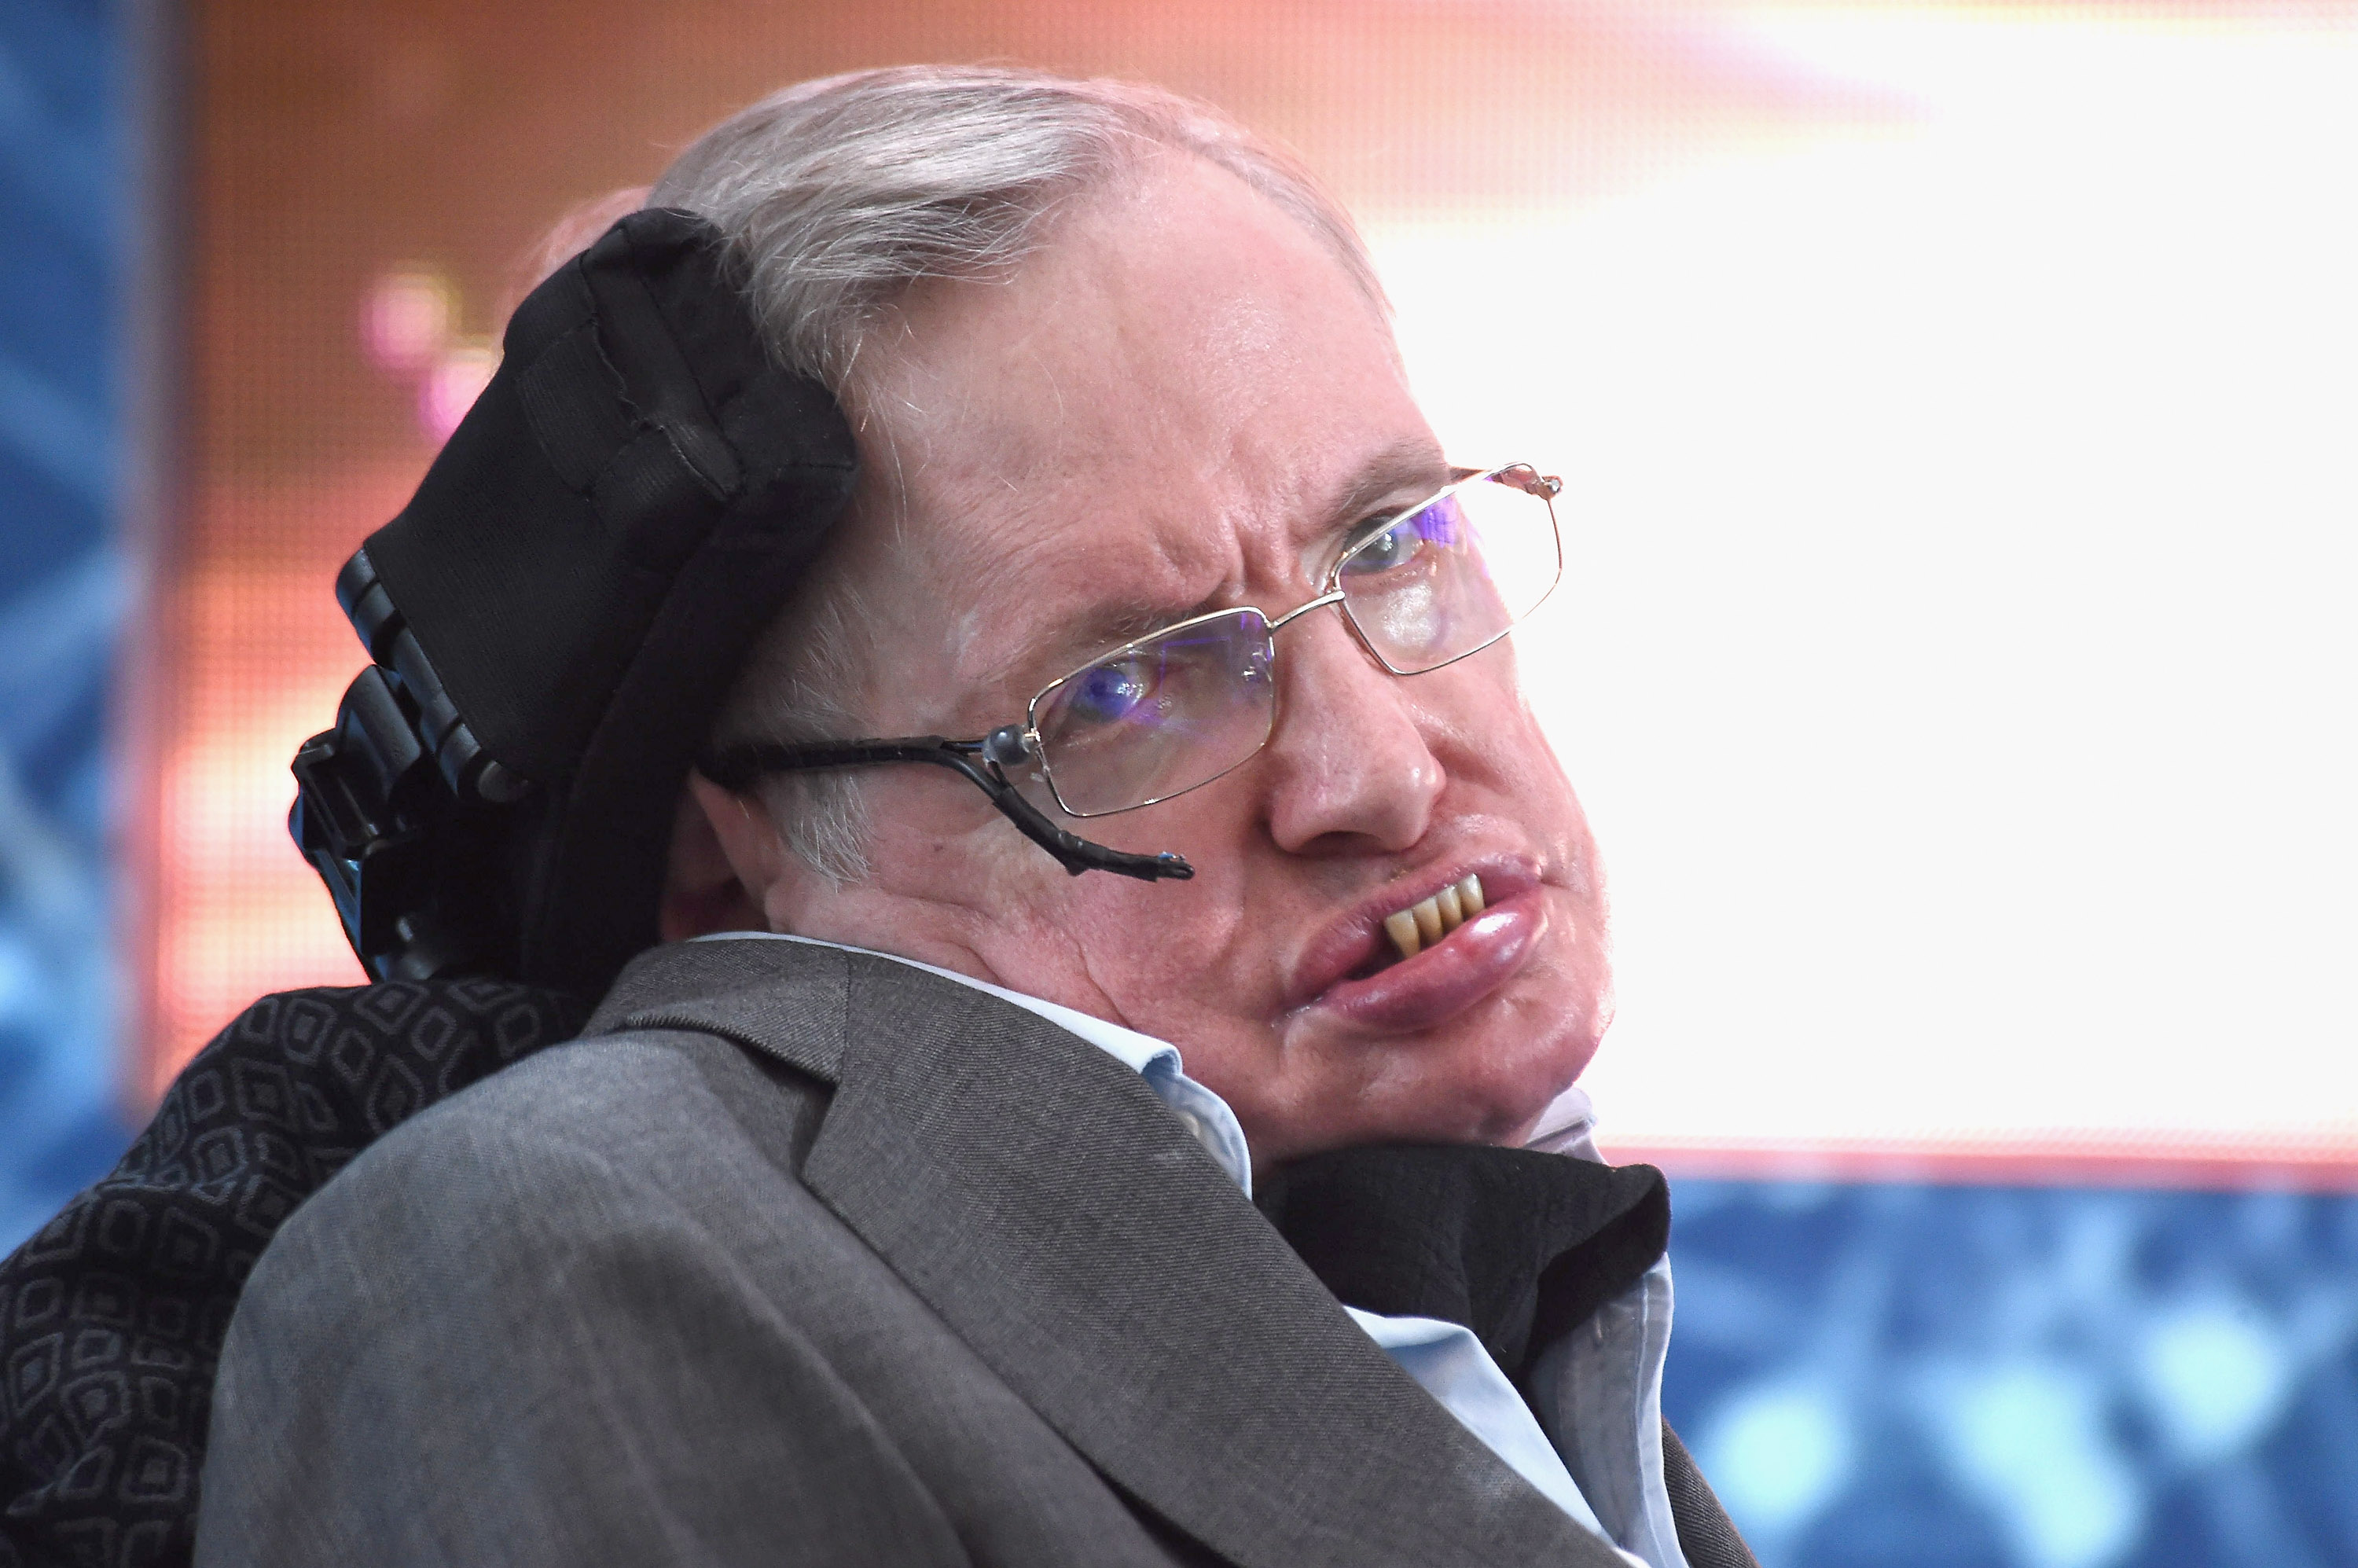 Cosmologist Stephen Hawking attends the New Space Exploration Initiative "Breakthrough Starshot" on April 12, 2016, in New York City (Gary Gershoff—WireImage/Getty Images)